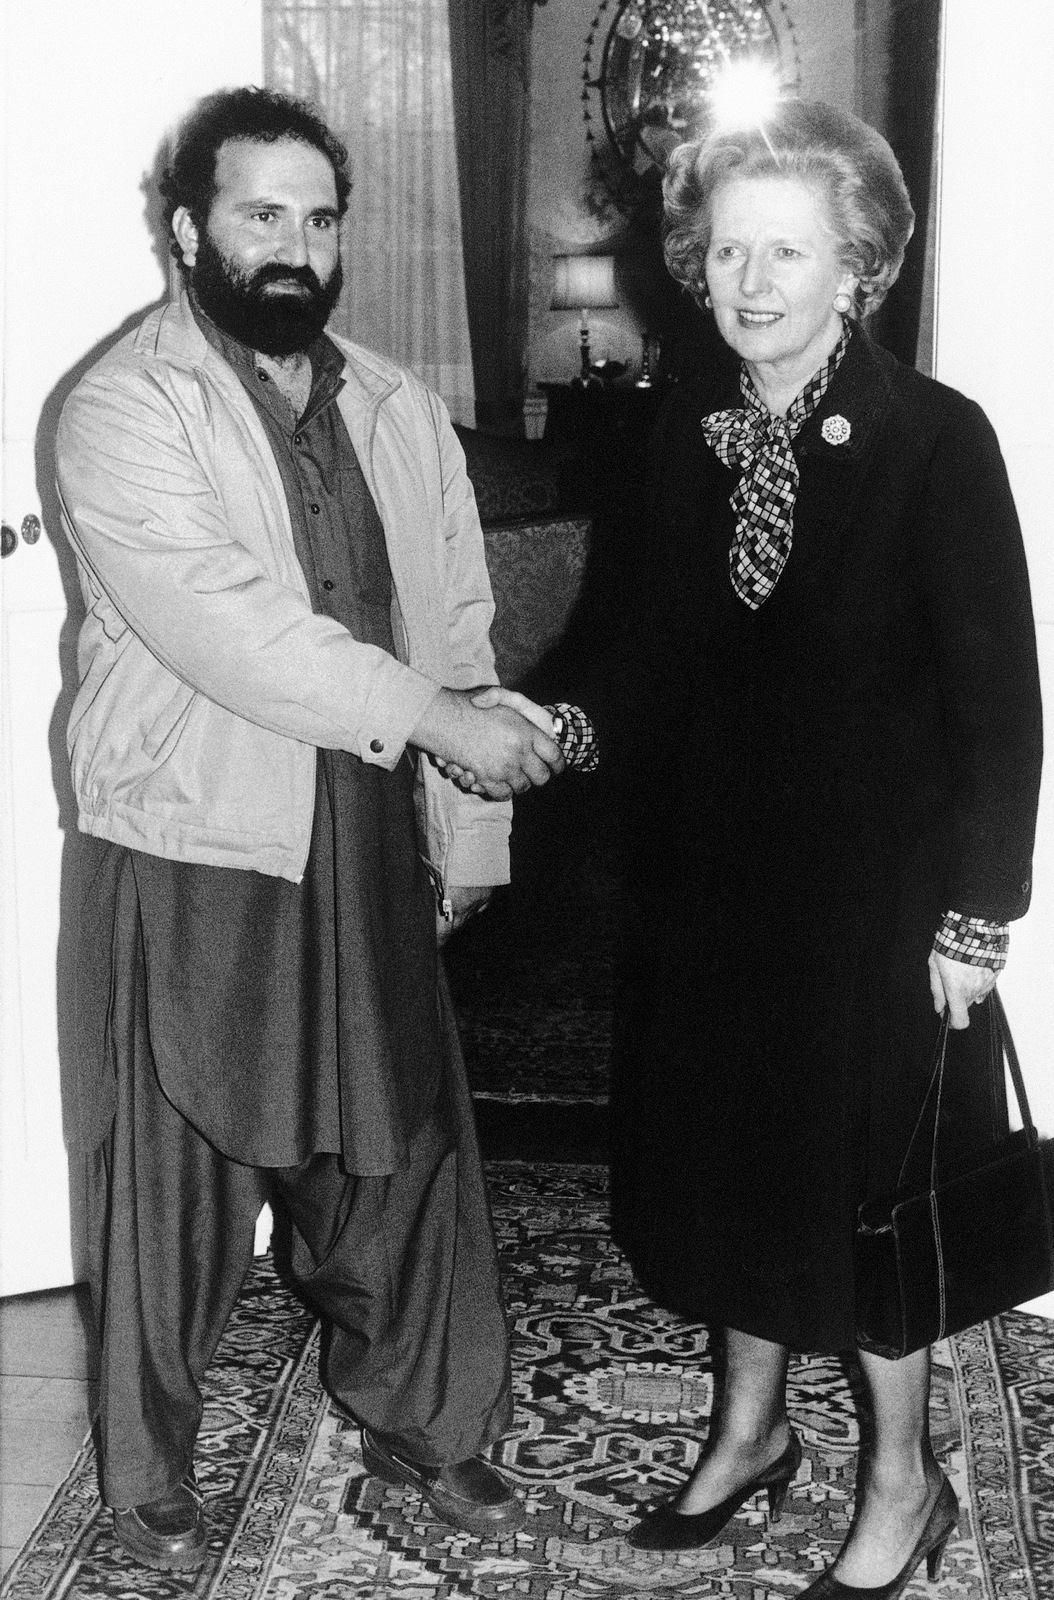 Afghan rebel leader Abdul Haq, commander of the Hesb-I-Islami resistance party, with Margaret Thatcher at No. 10 Downing Street in London, March 11, 1986. (AP/Press Association)